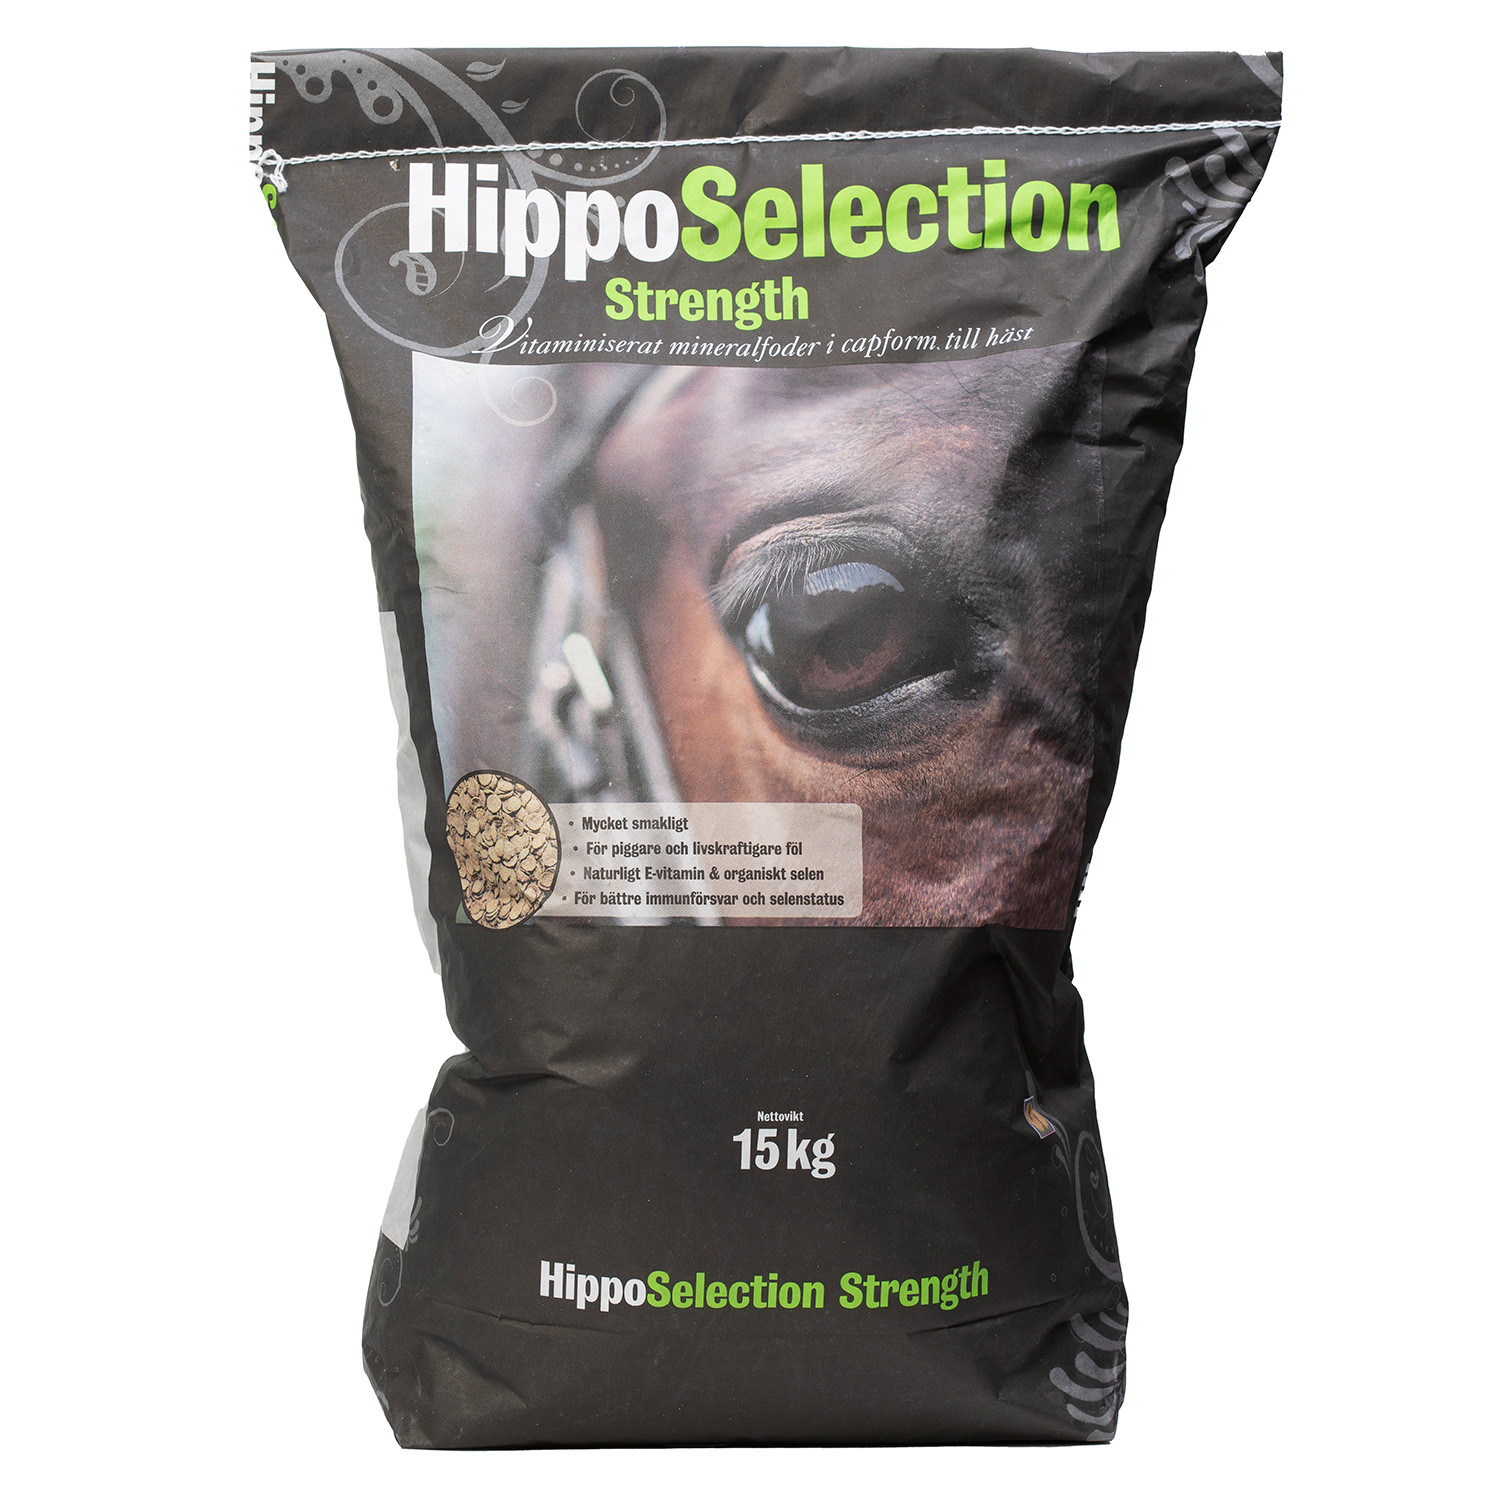 HIPPO SELECTION15 KG